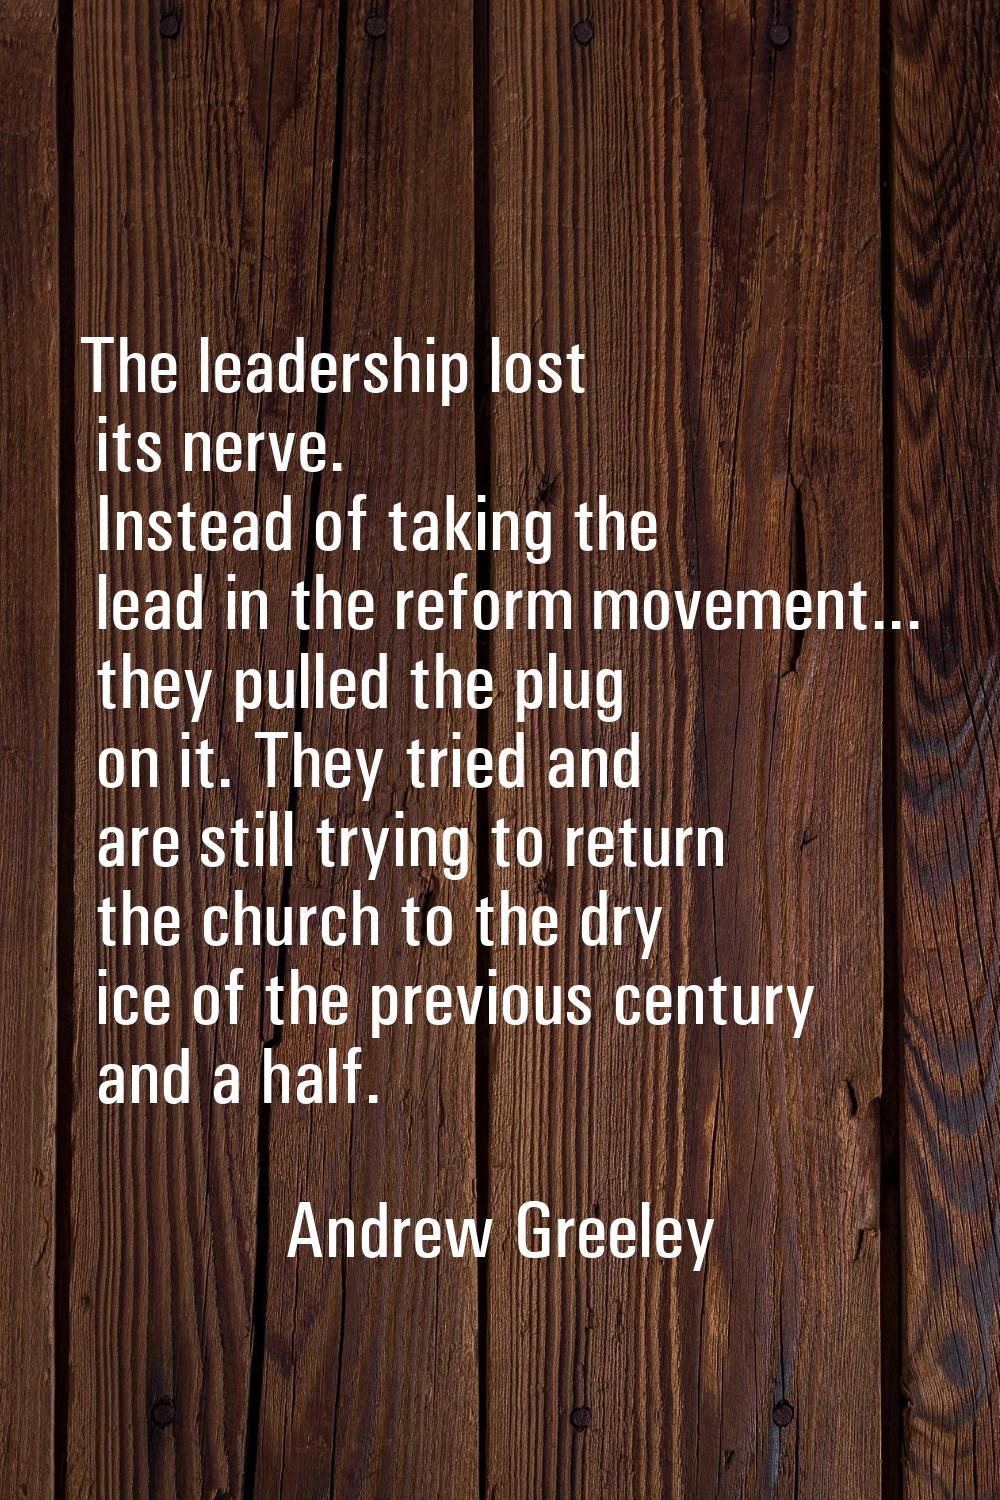 The leadership lost its nerve. Instead of taking the lead in the reform movement... they pulled the